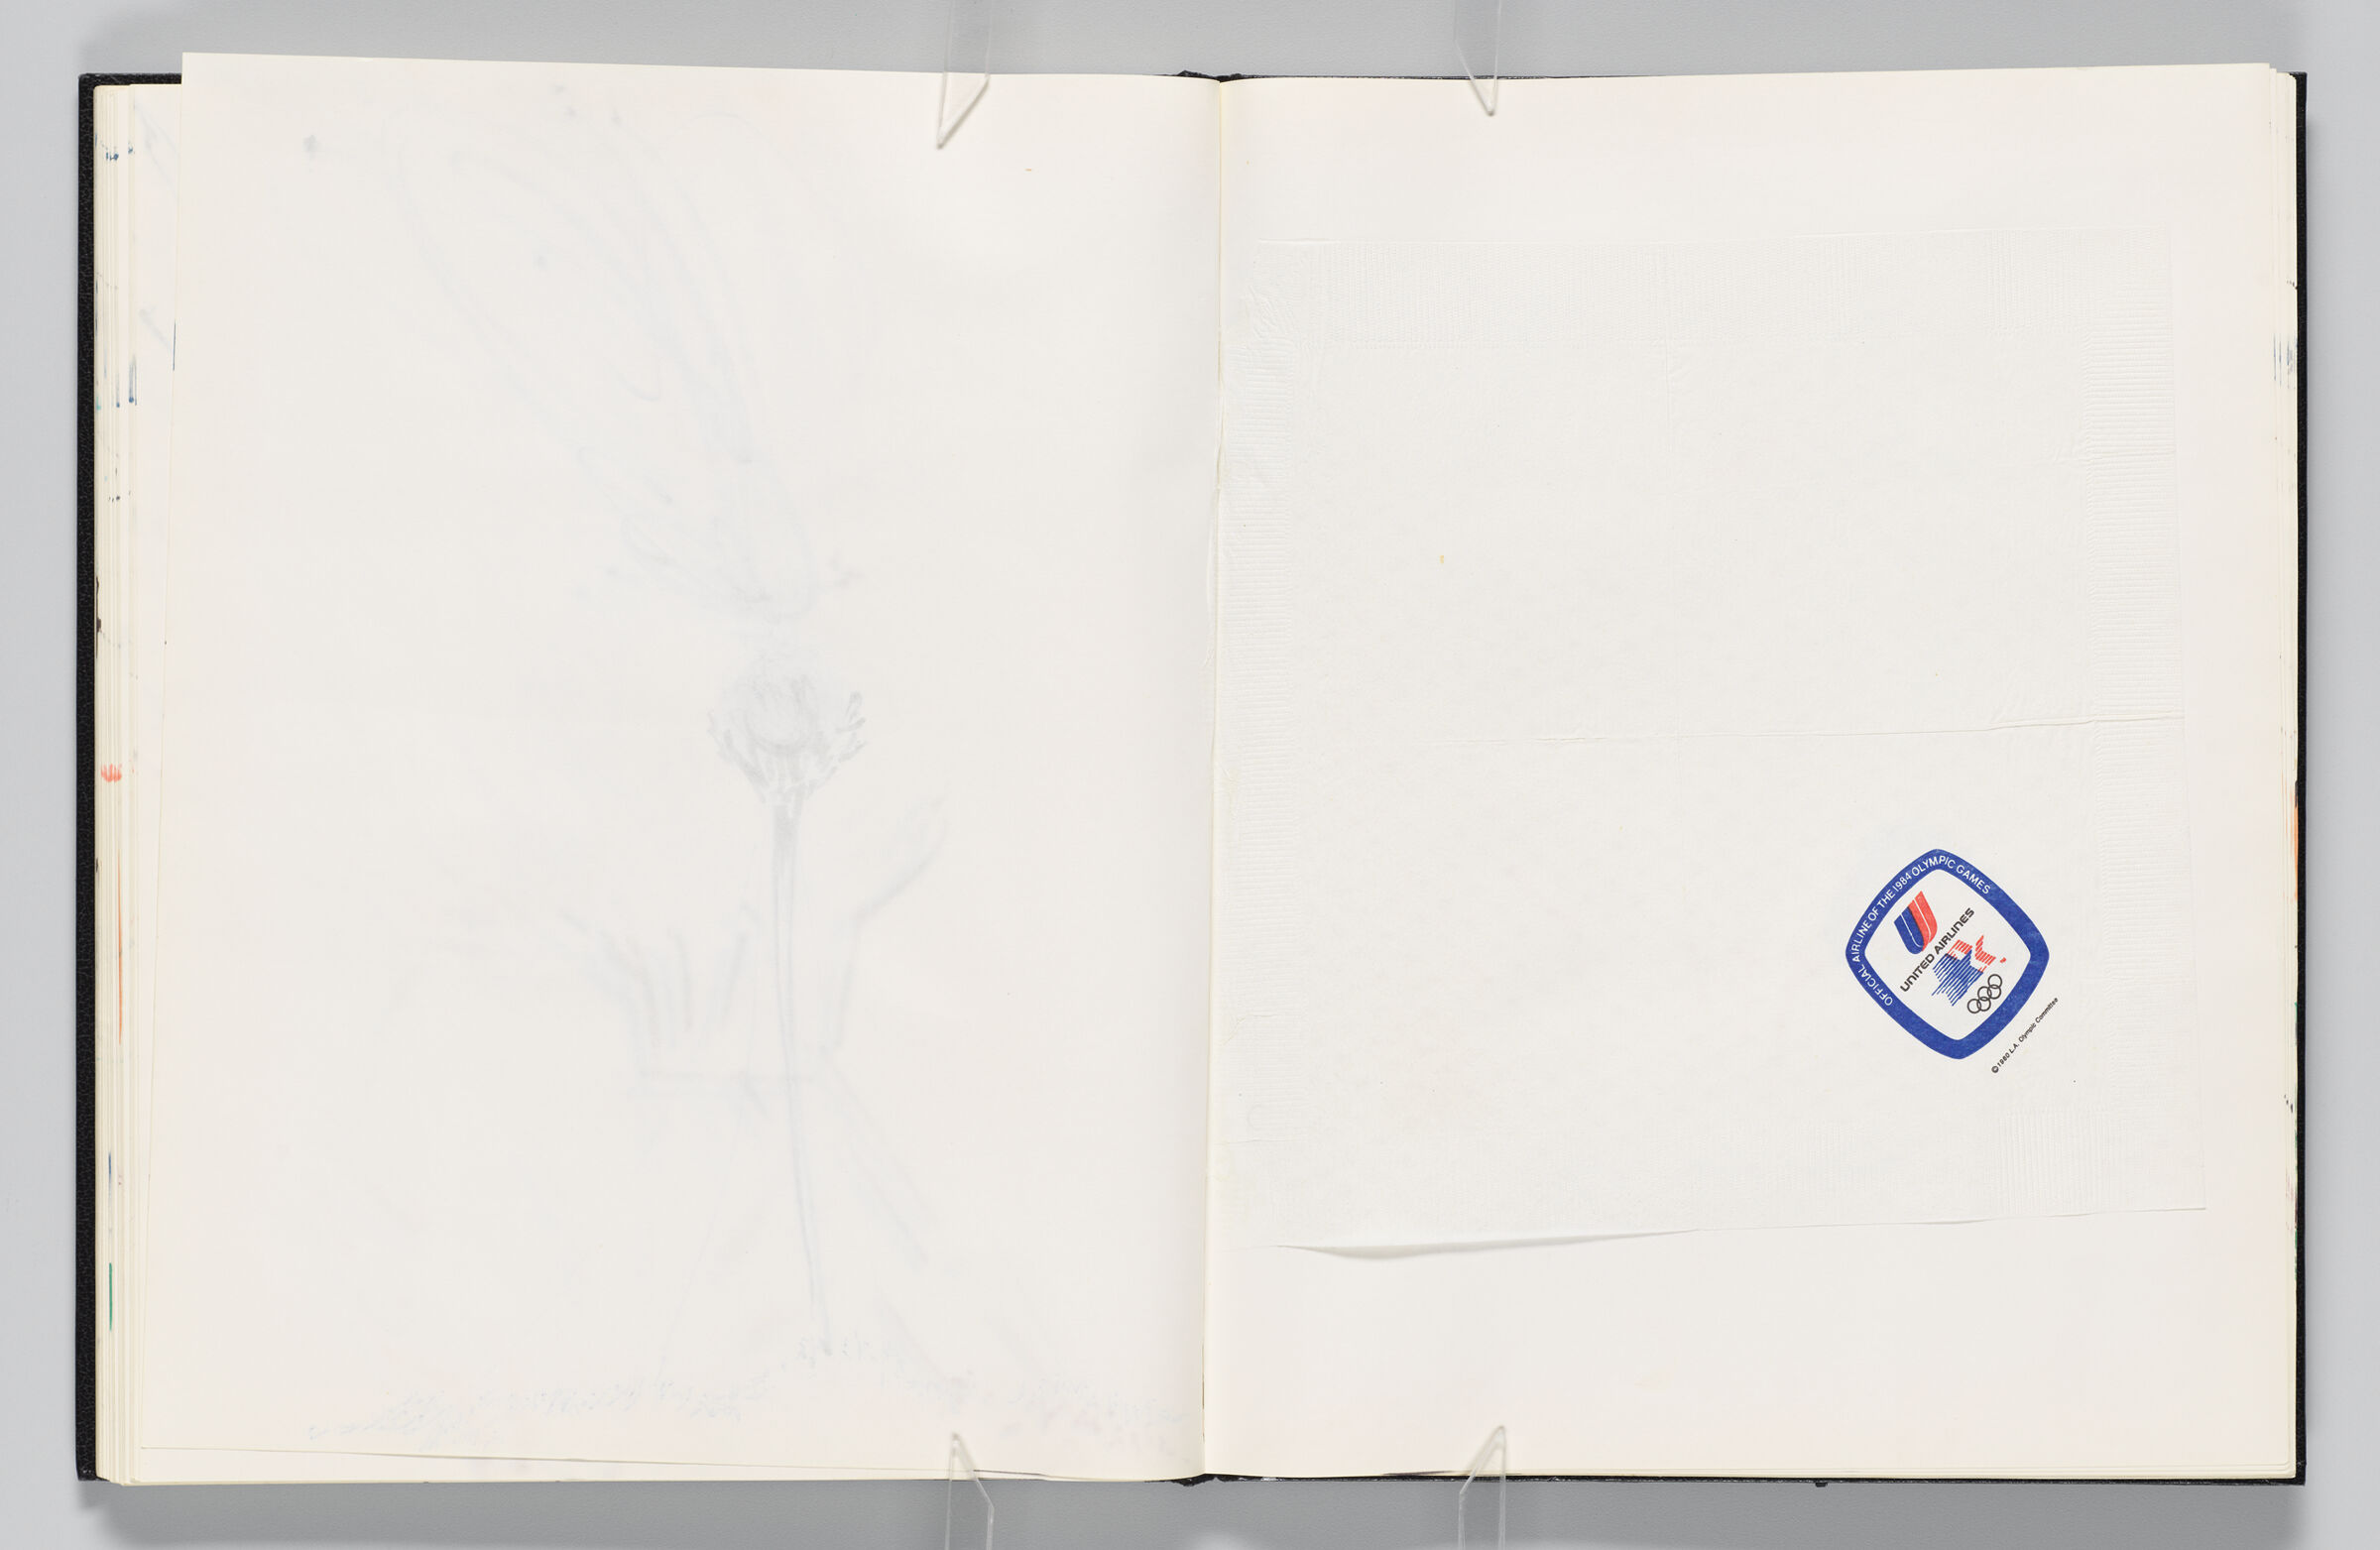 Untitled (Bleed-Through Of Previous Page, Left Page); Untitled (United Airlines Olympic Napkin, Right Page)